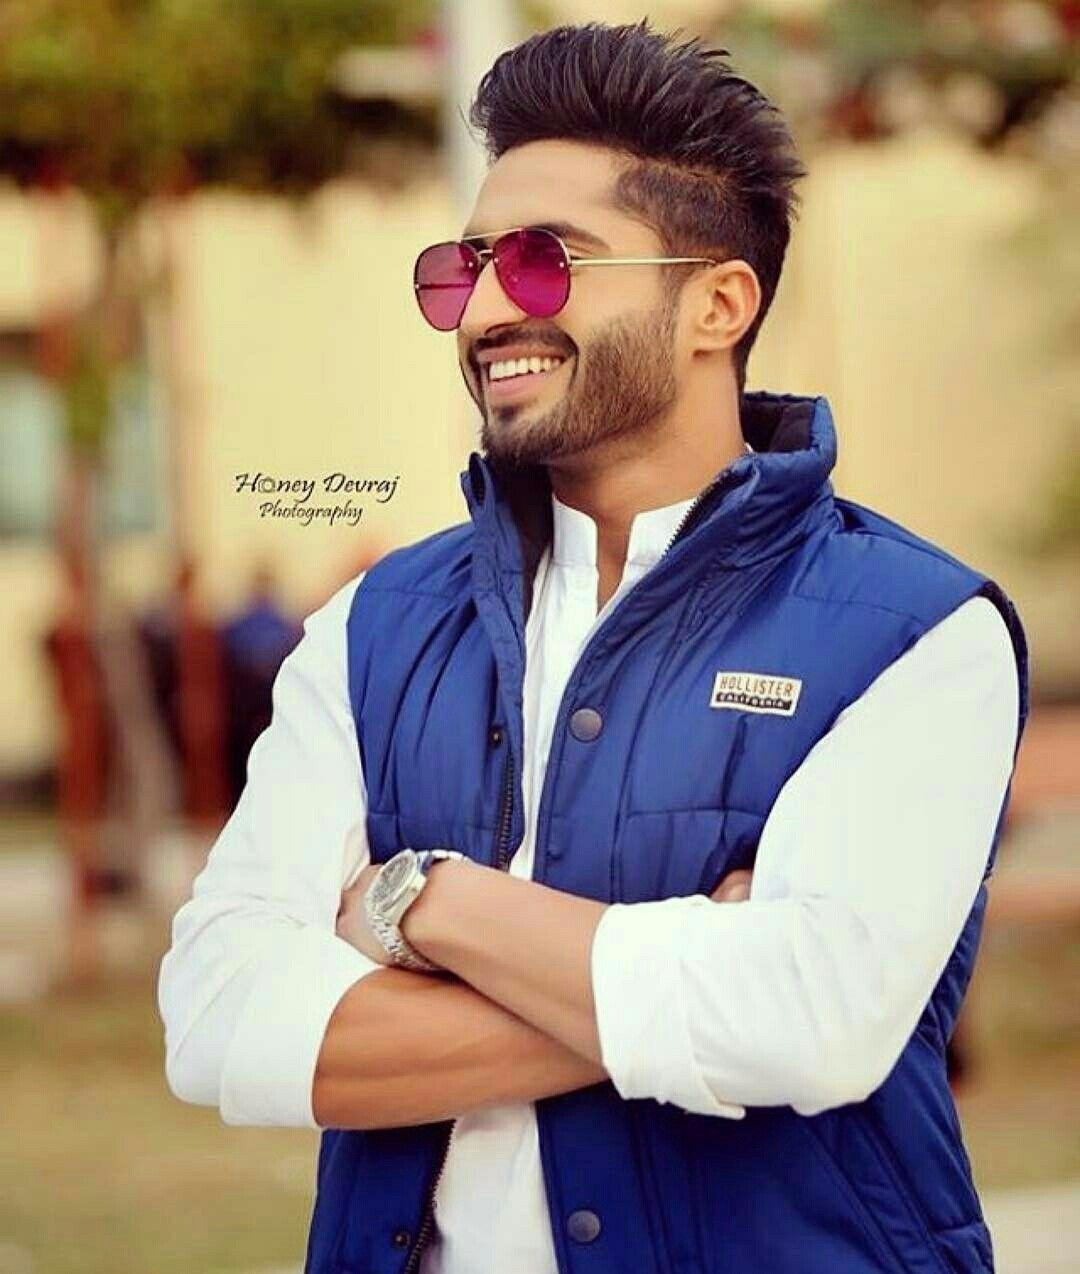 Pin by Jassi gill on Jassi gill | Cool hairstyles for men, Jassi gill  hairstyle, Photography poses for men